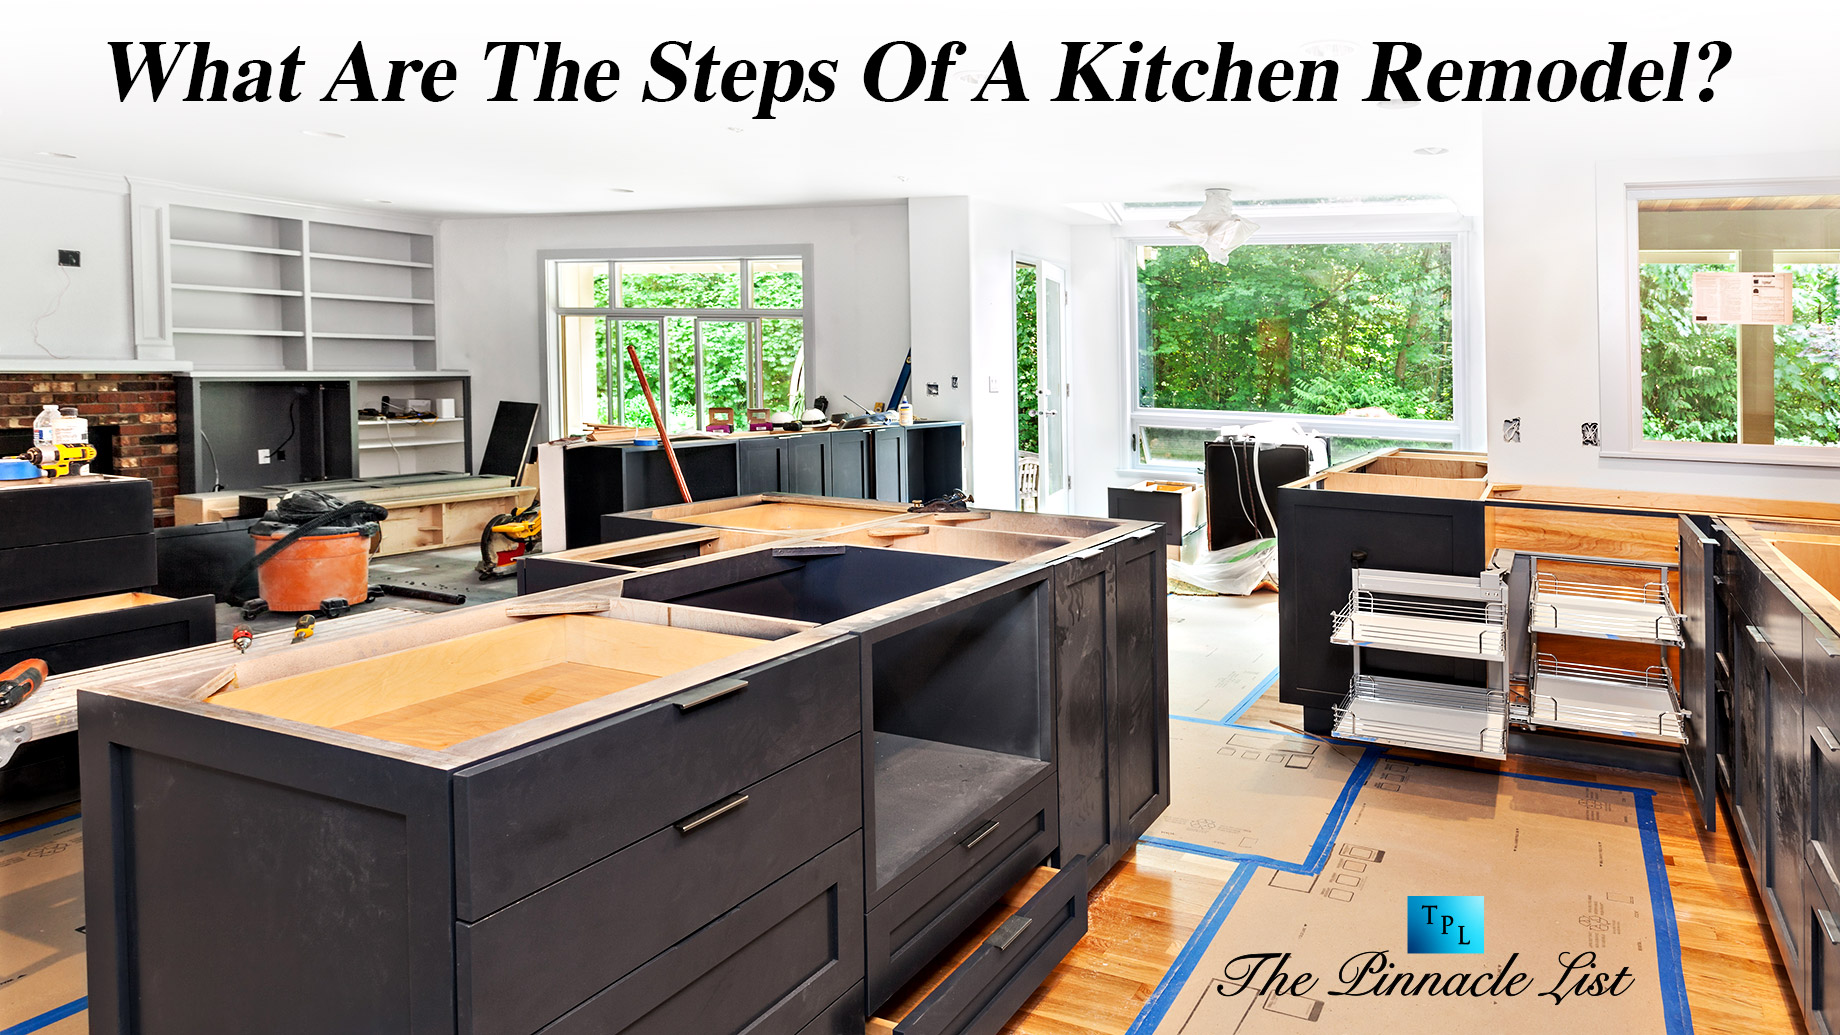 What Are The Steps Of A Kitchen Remodel?